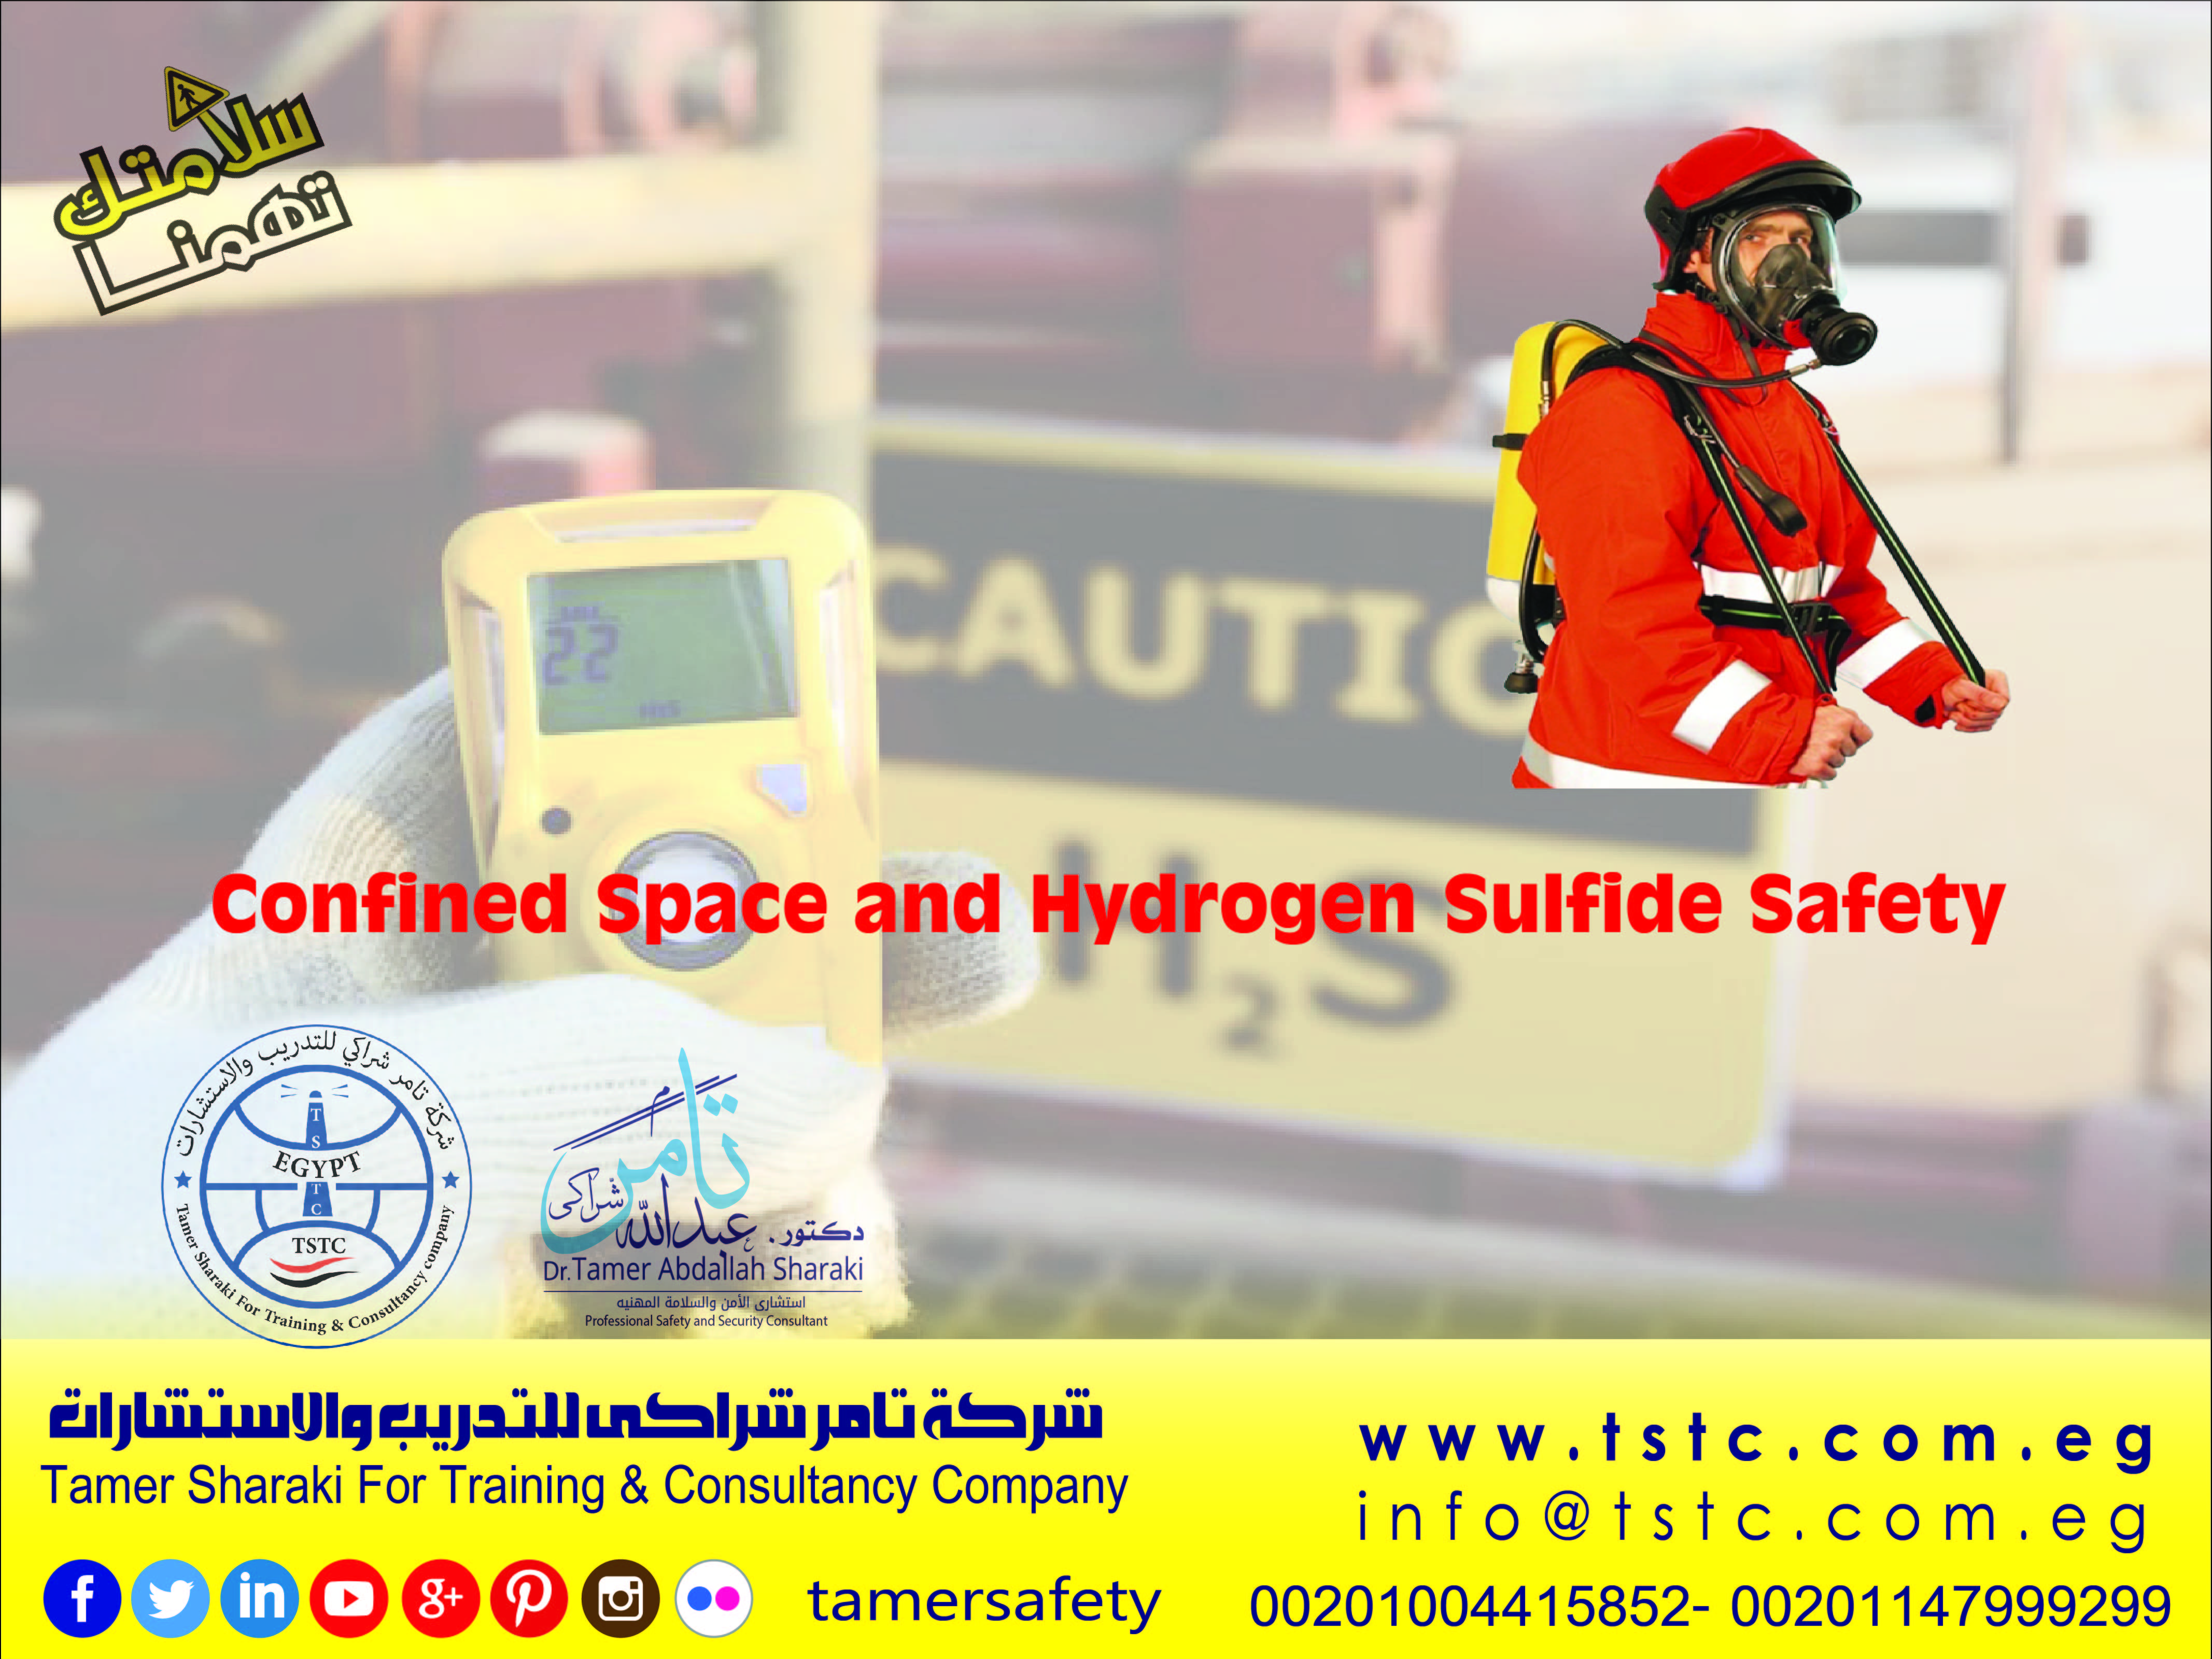 Confined Space and Hydrogen Sulfide Safety Training Course